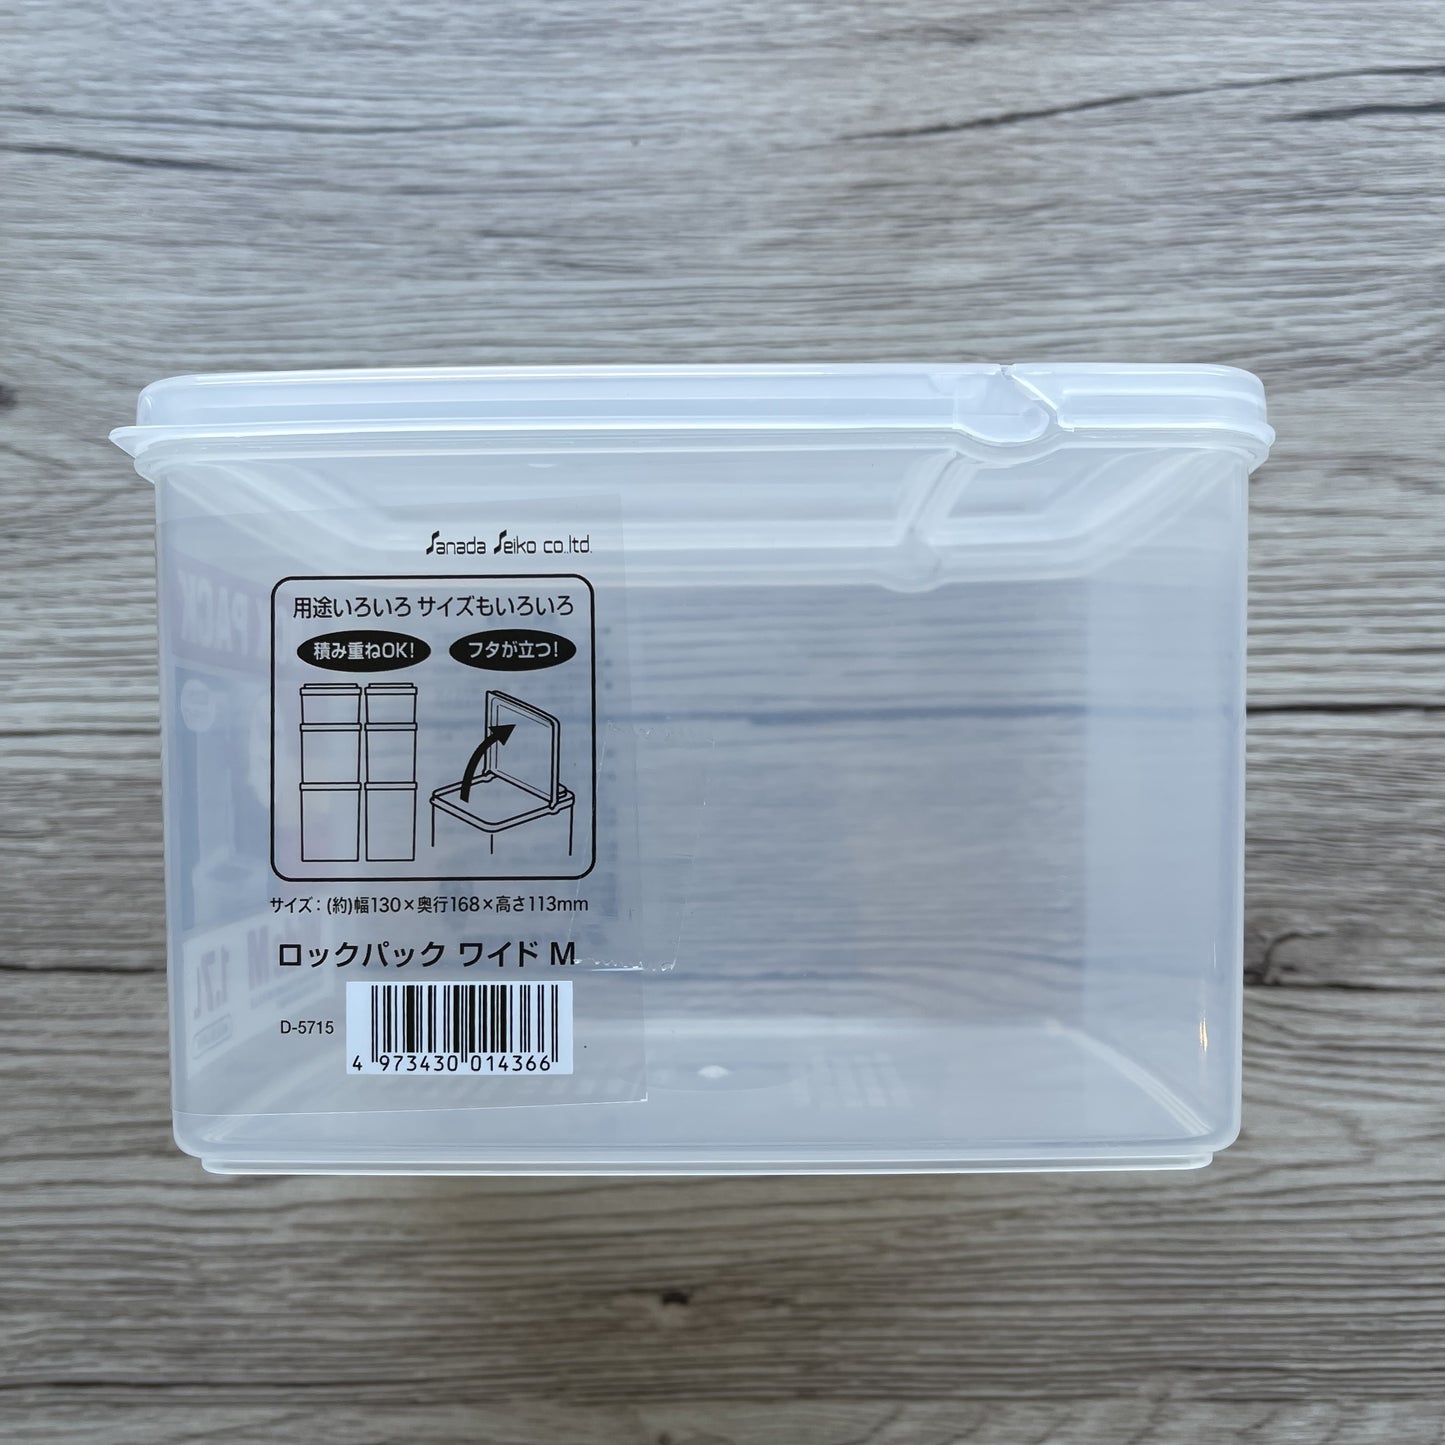 Kitchen Storage Container 1.7L (Made in Japan)